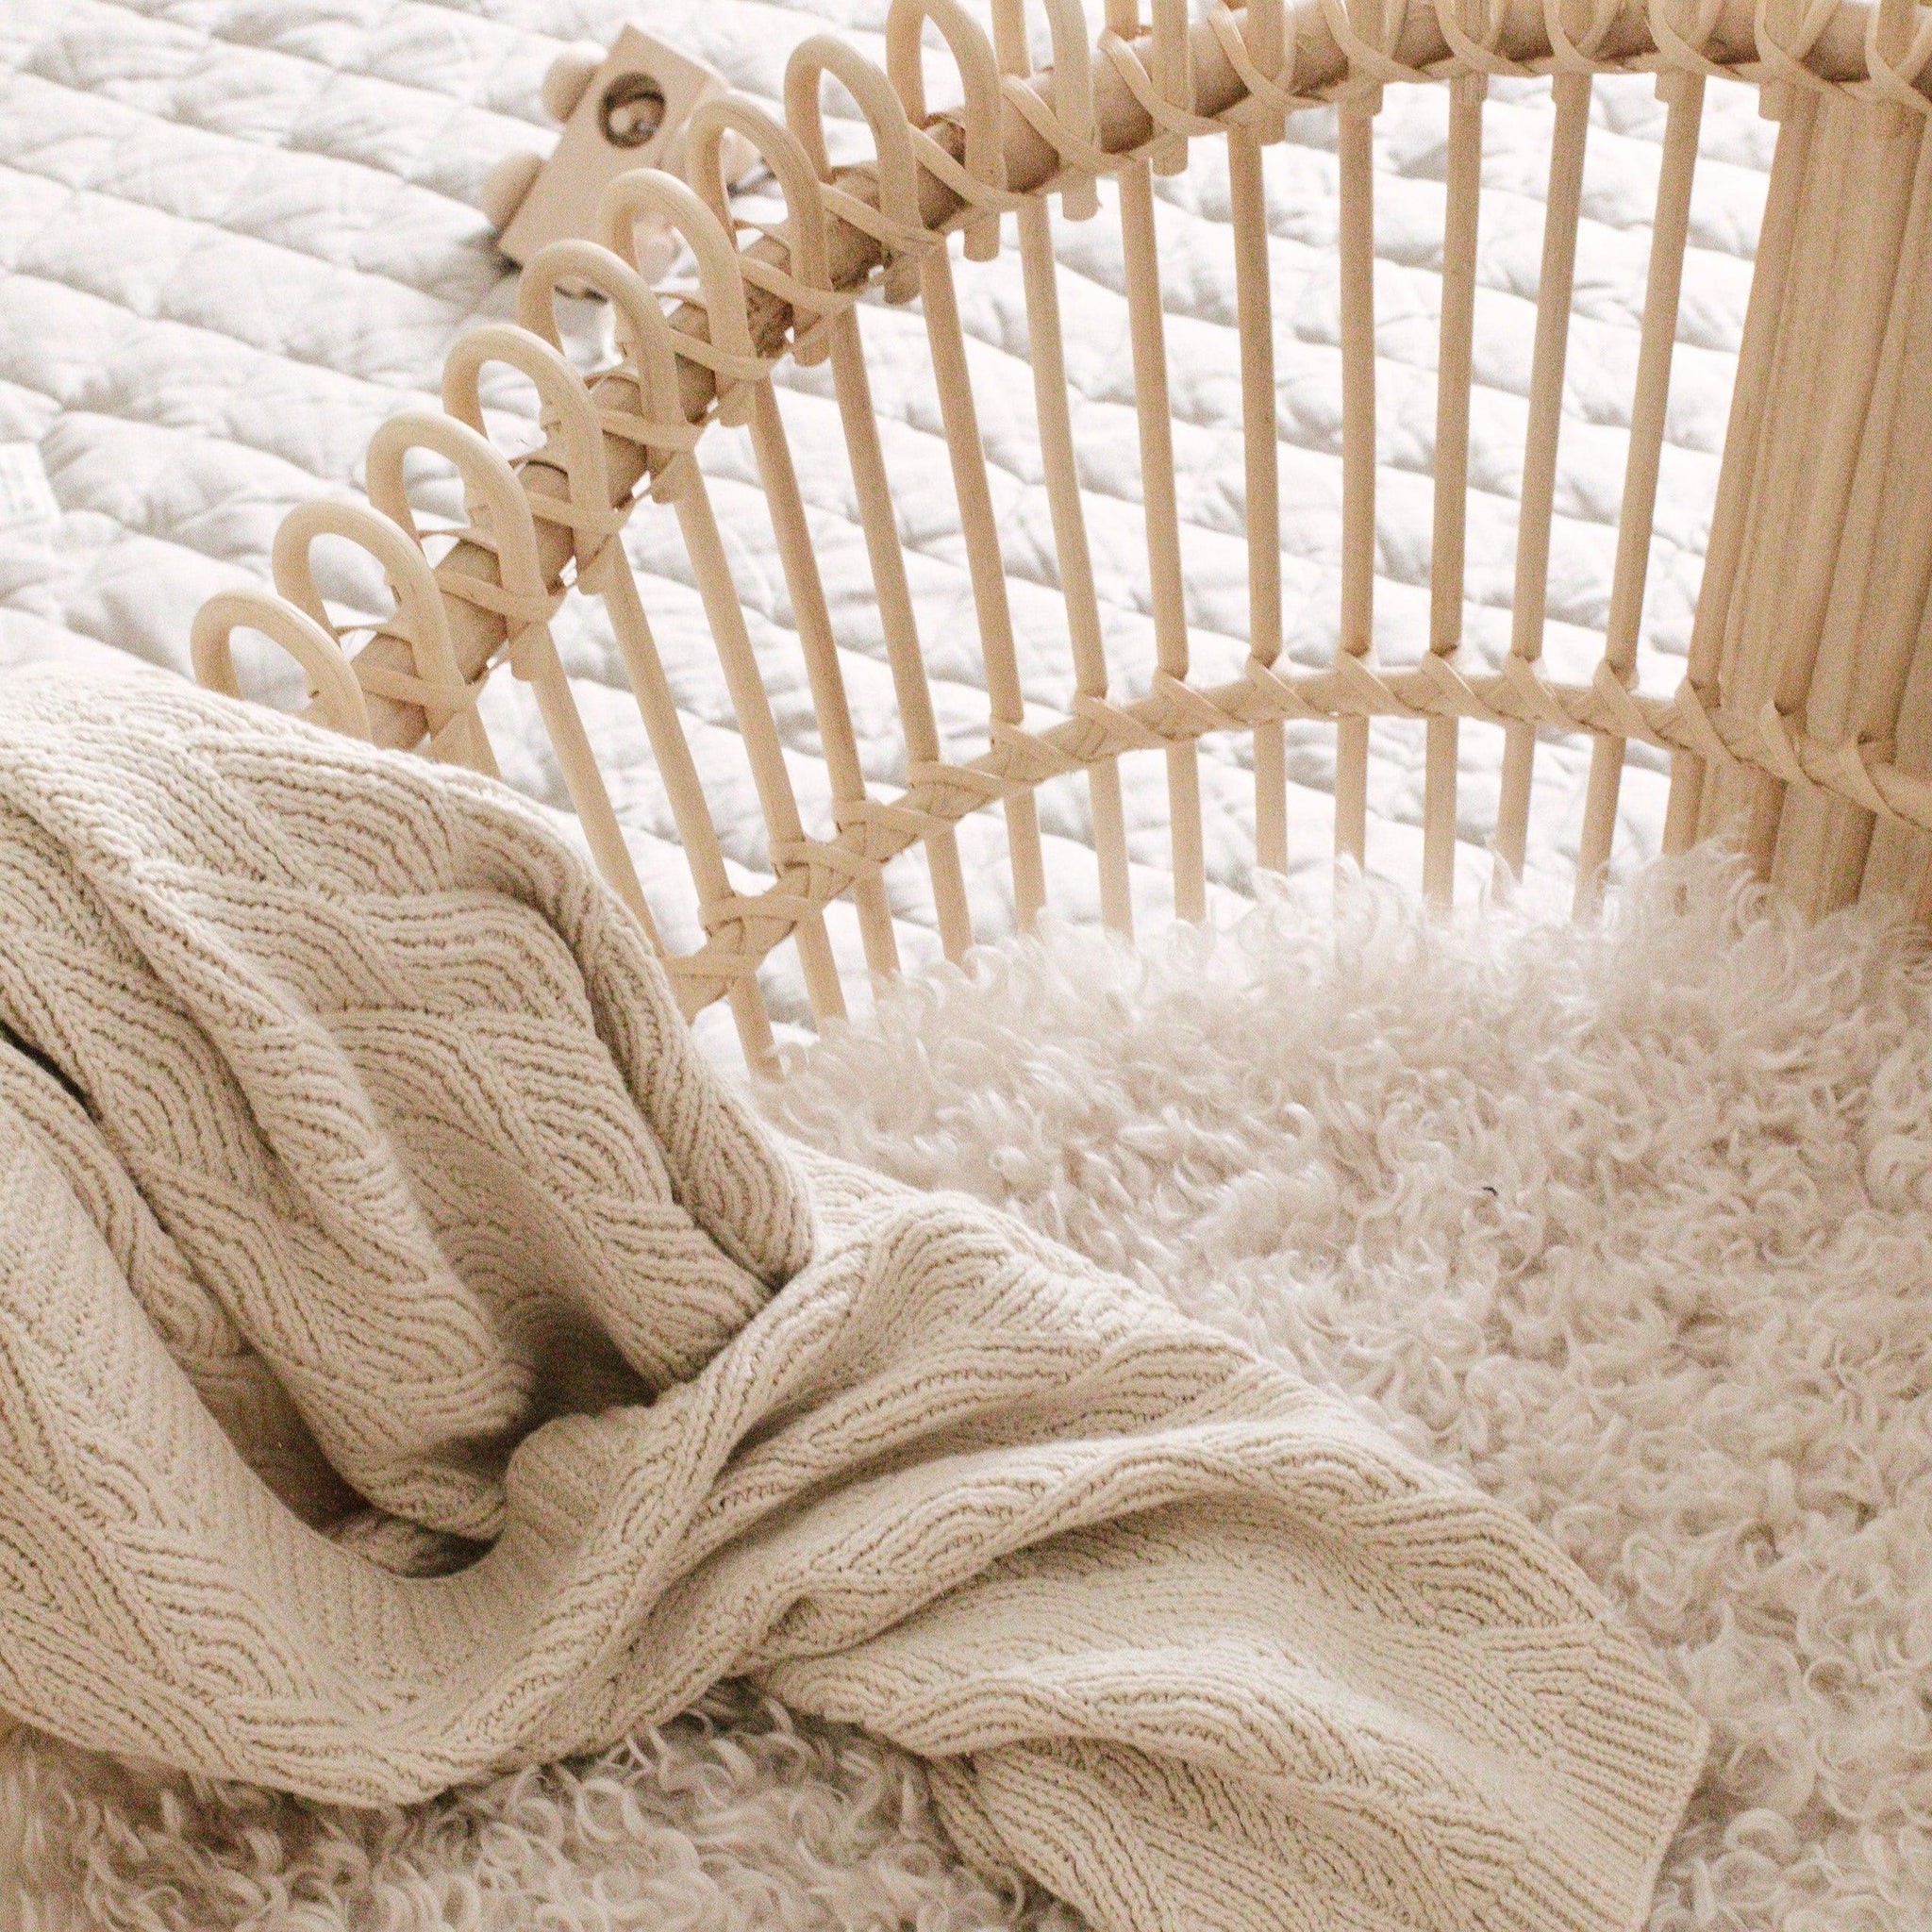 This gorgeous oatmeal shell stitch blanket is made from 100% GOTS certified organic cotton.  Combed, ring spun yarn is used to make the blanket extra soft whilst also durable.  Sizing is 100 x 80cm, perfect for use in bassinets, prams, car seats or loungers.